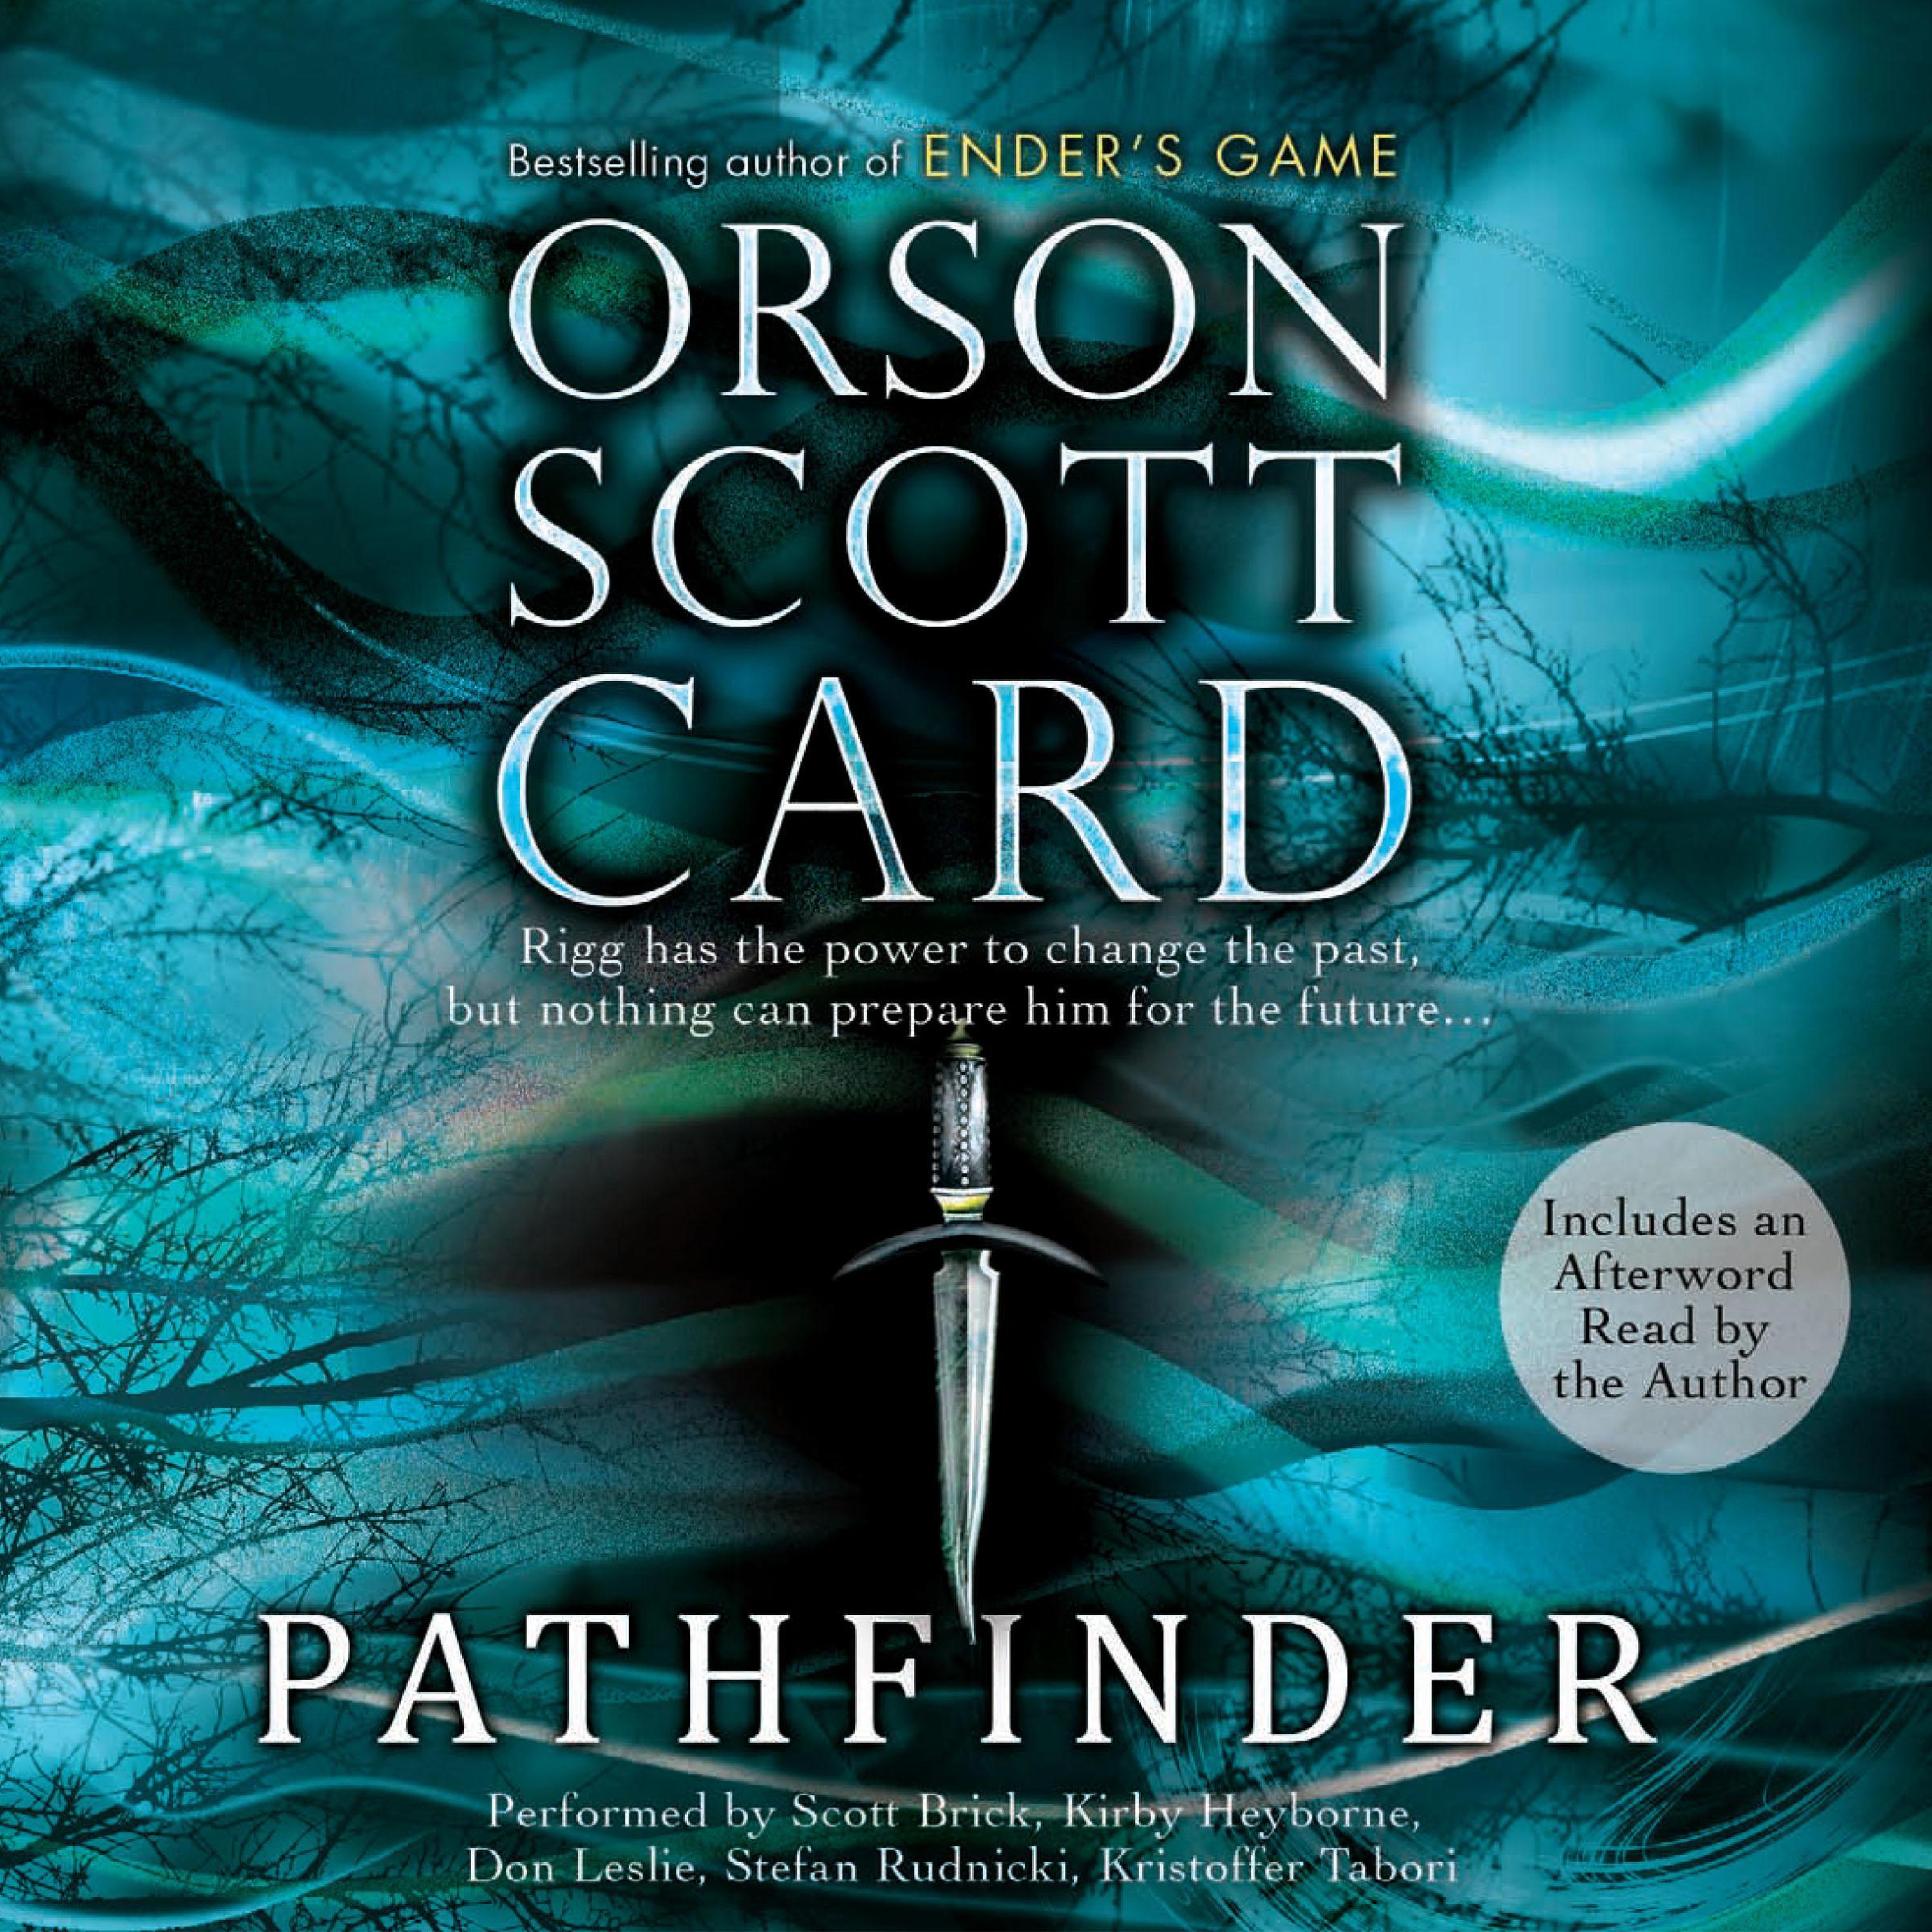 Pathfinder книга. Book Enders game by Orson Scott Card. Квест Патфайндера книга. Книга Патфайндер АСТ.